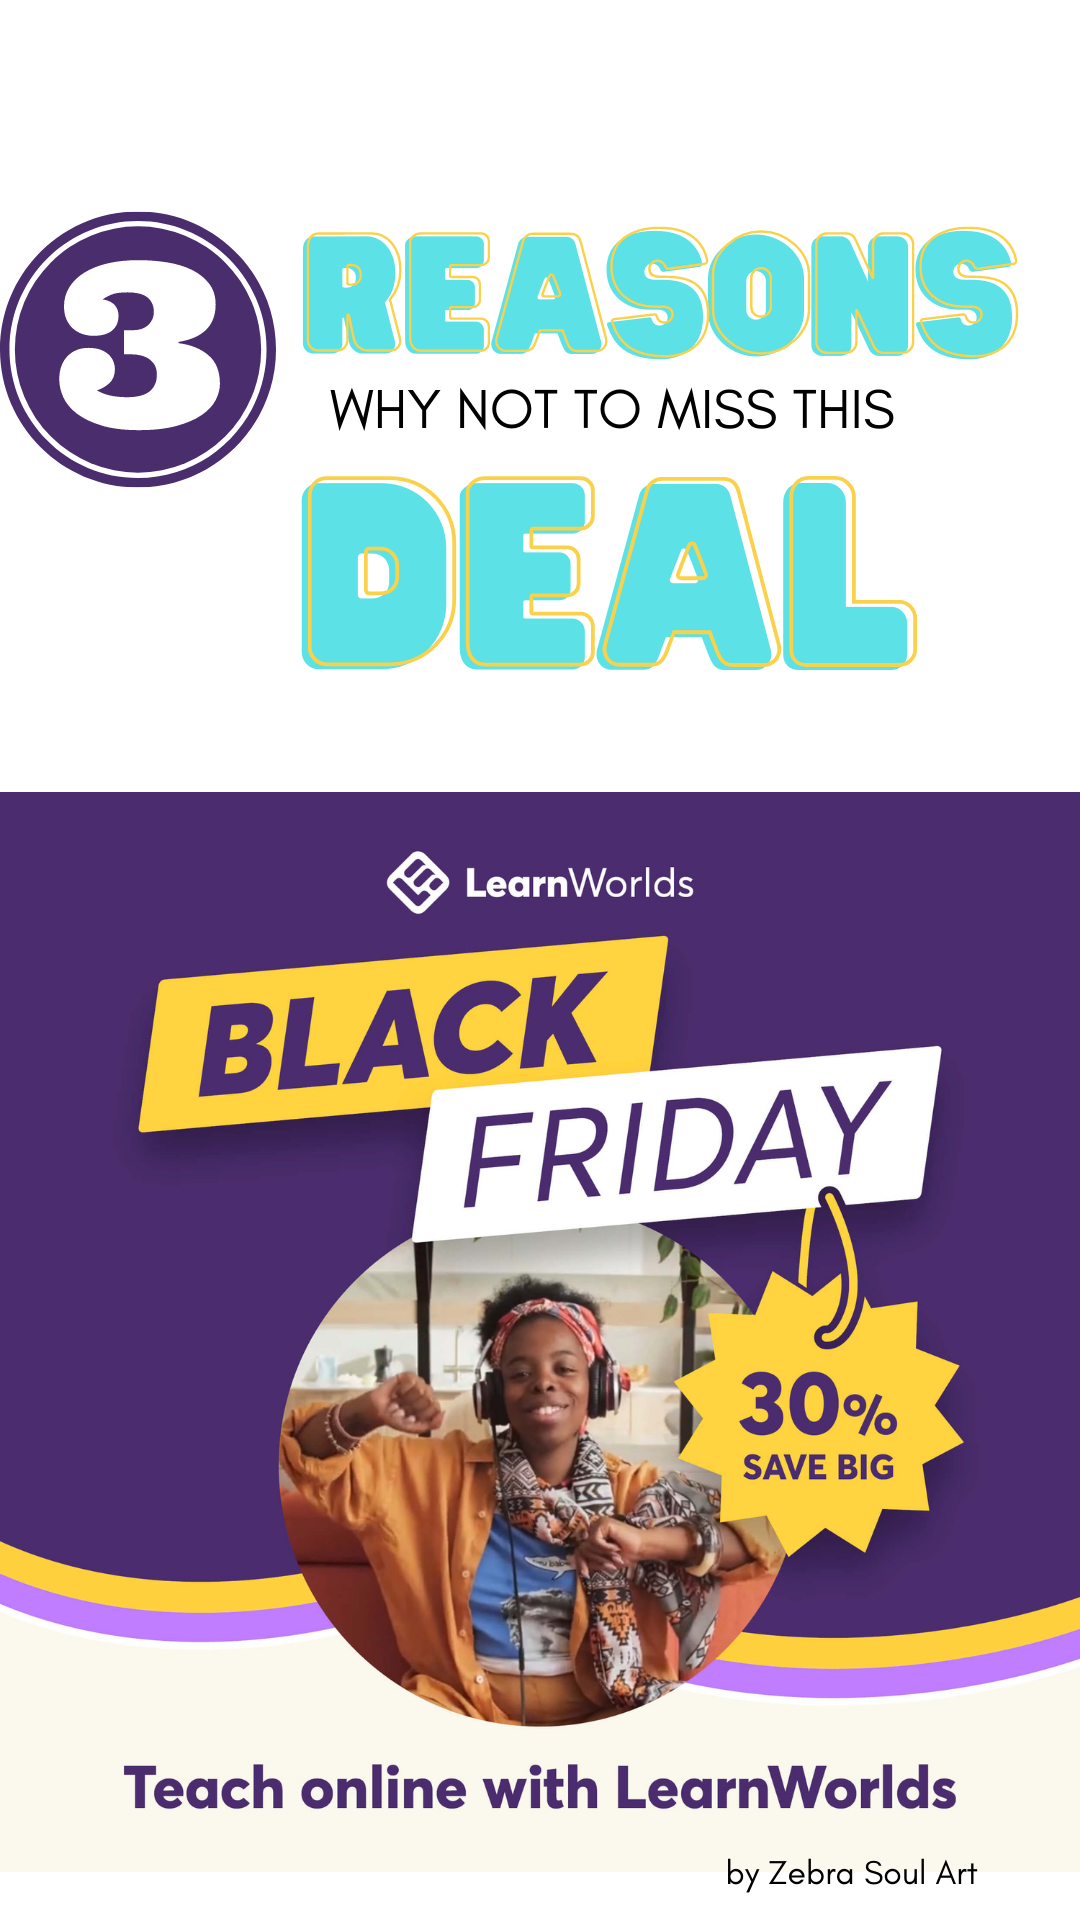 13 Reasonsy why you don't want to miss Learnworlds Black Friday Deal